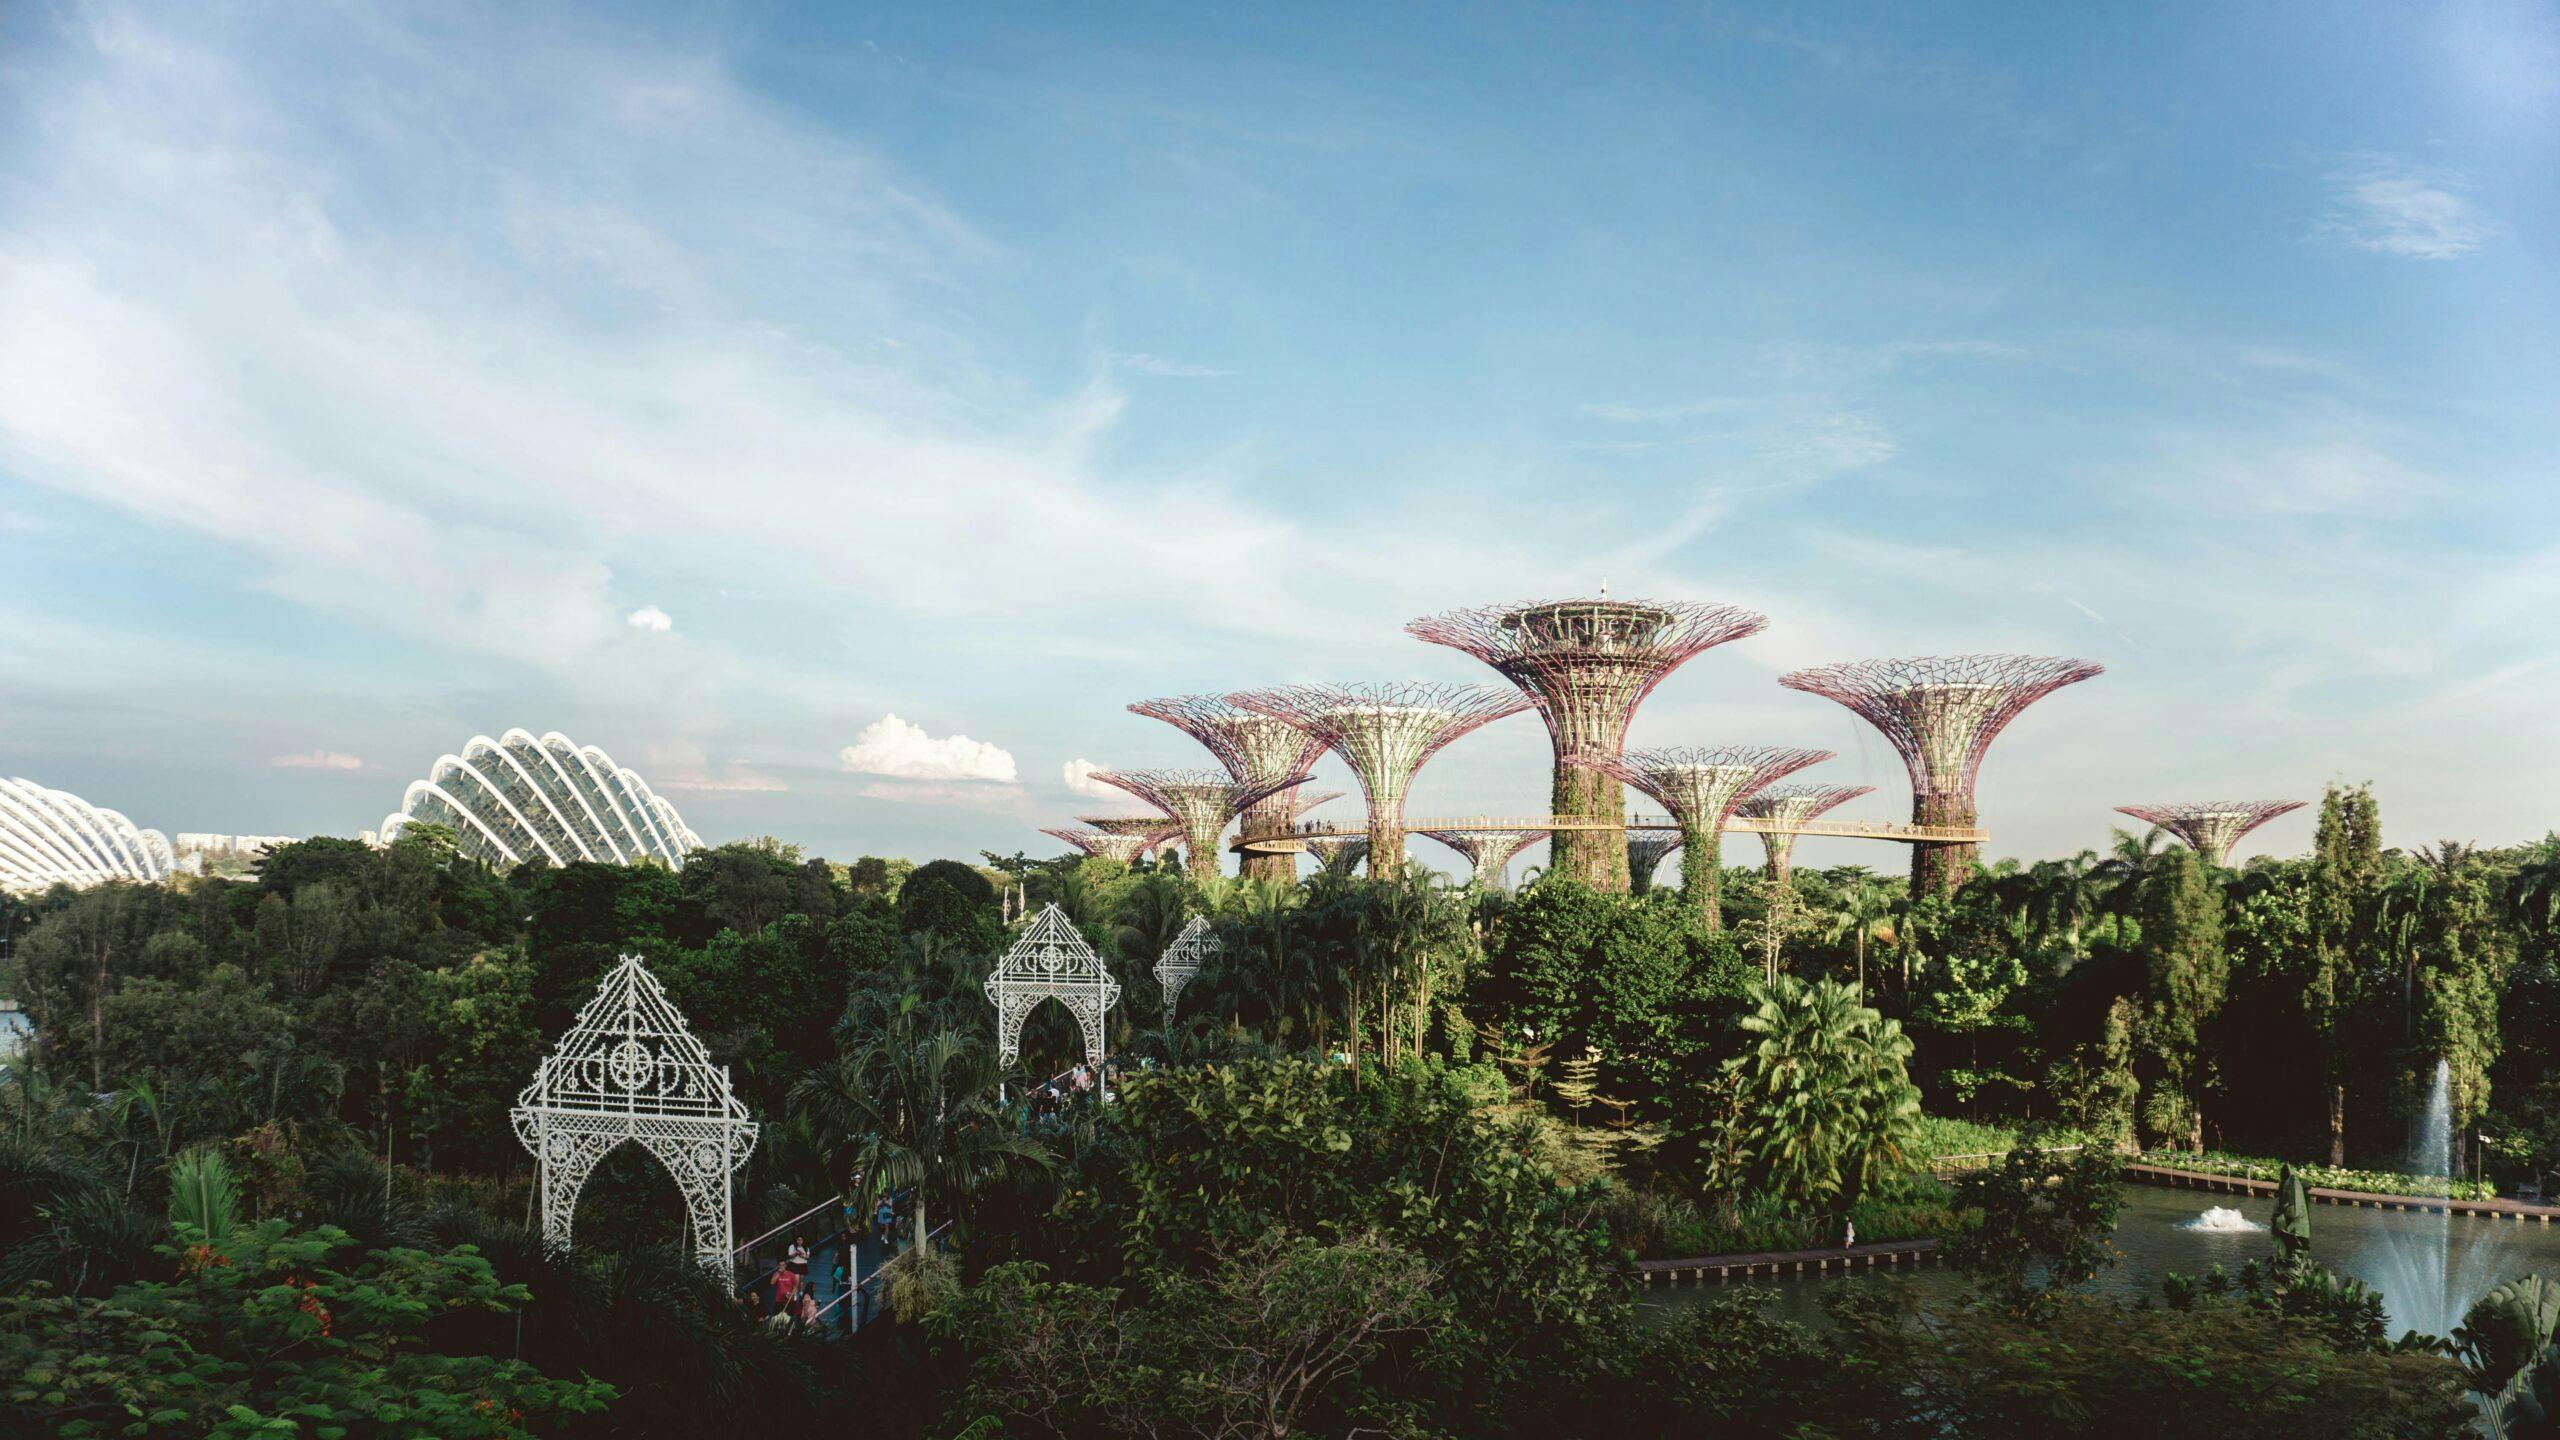 We're reimagining a fairer way to visit Singapore